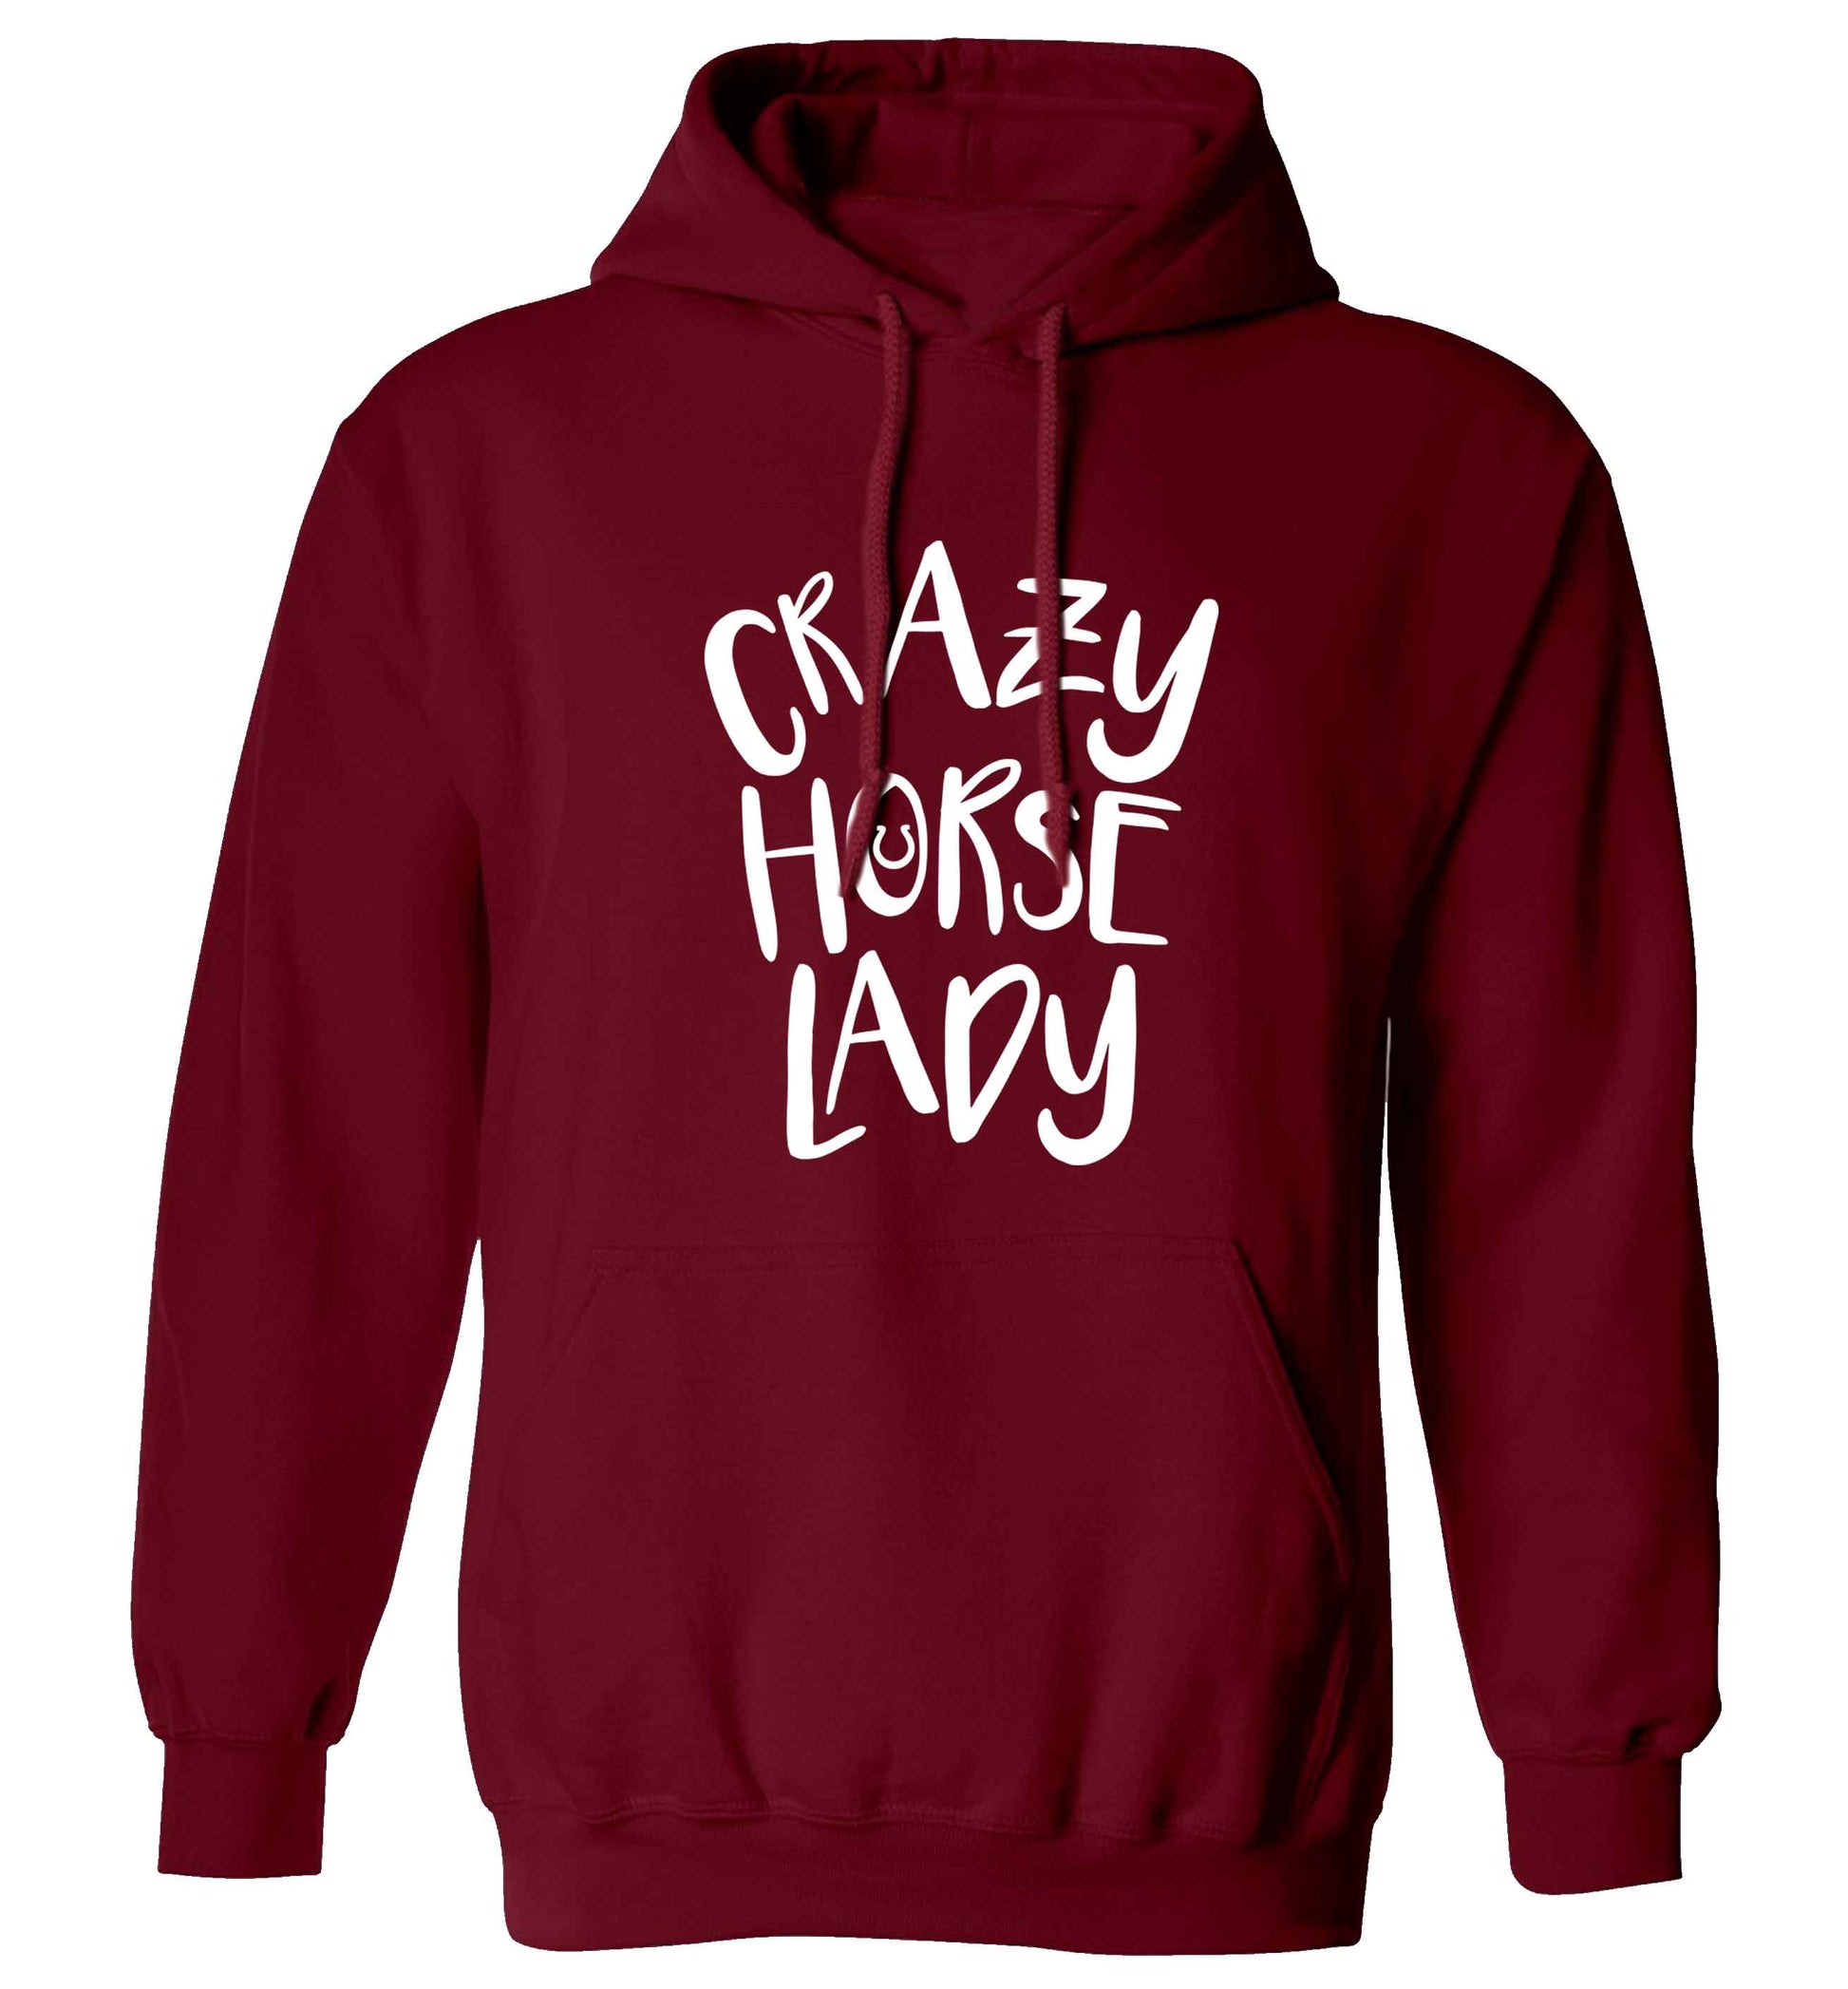 Crazy horse lady adults unisex maroon hoodie 2XL